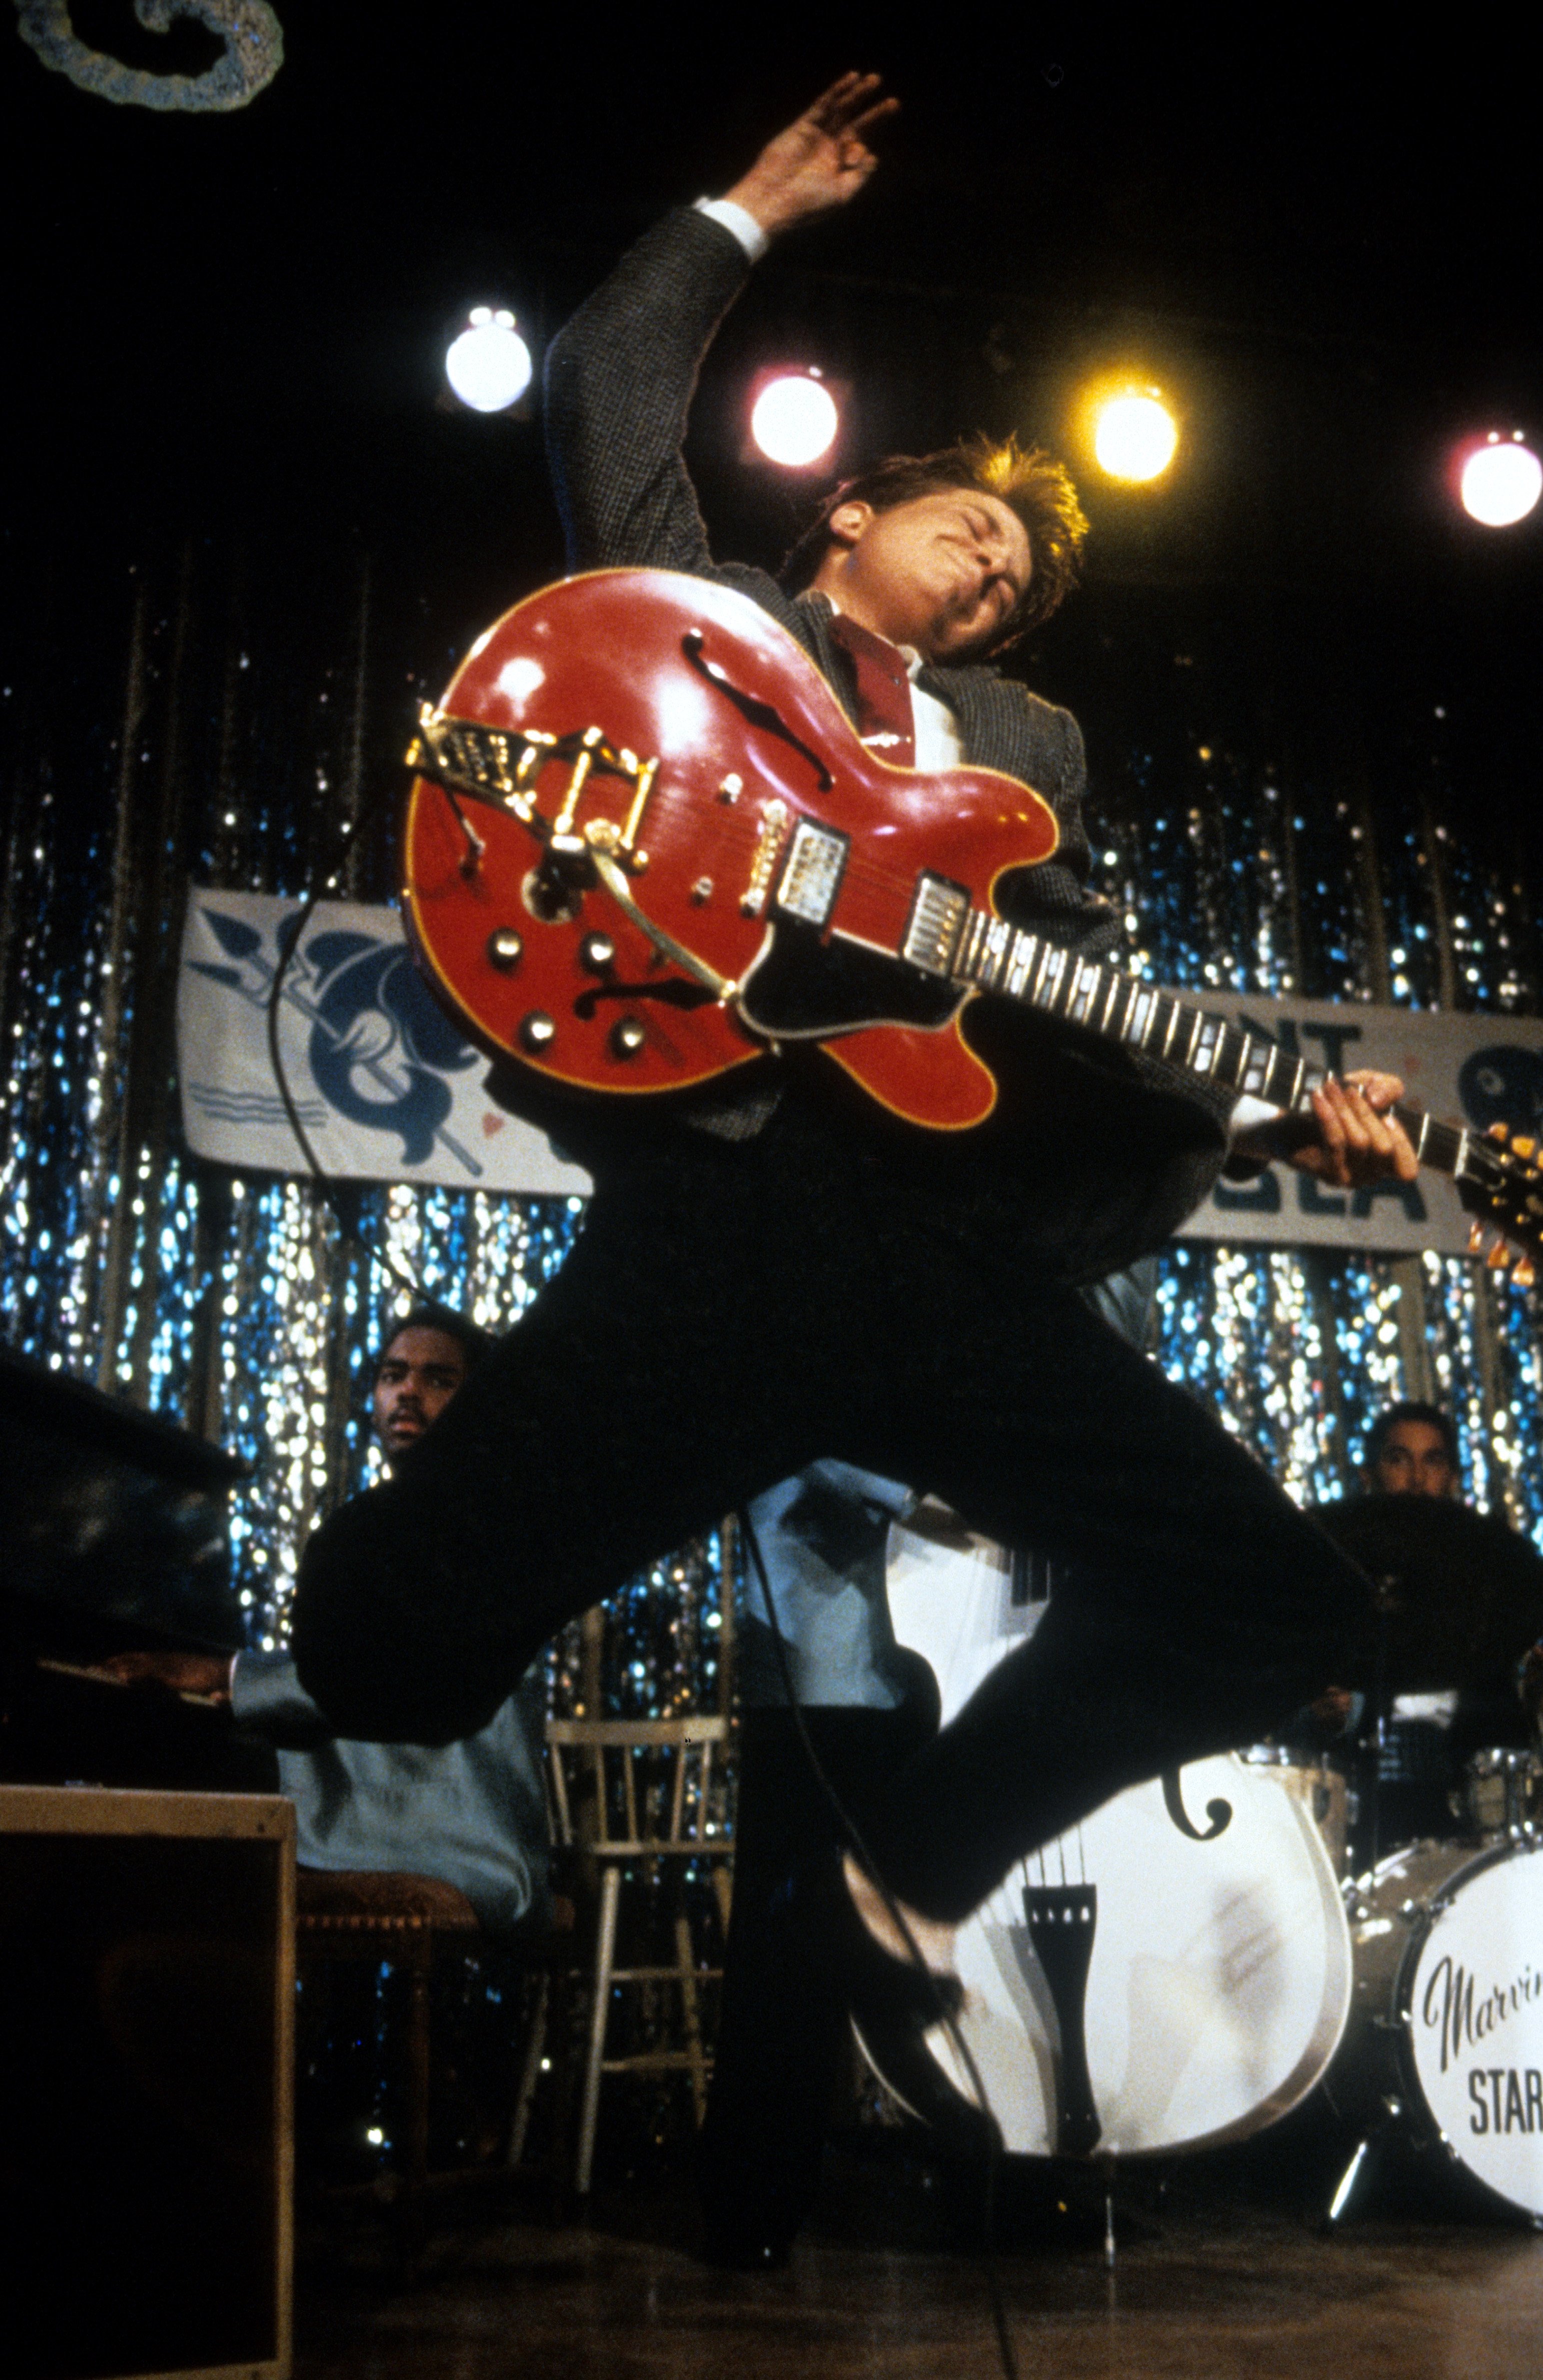 Michael J Fox leaping in air with guitar in a scene from the film 'Back To The Future', 1985. | Source: Getty Images